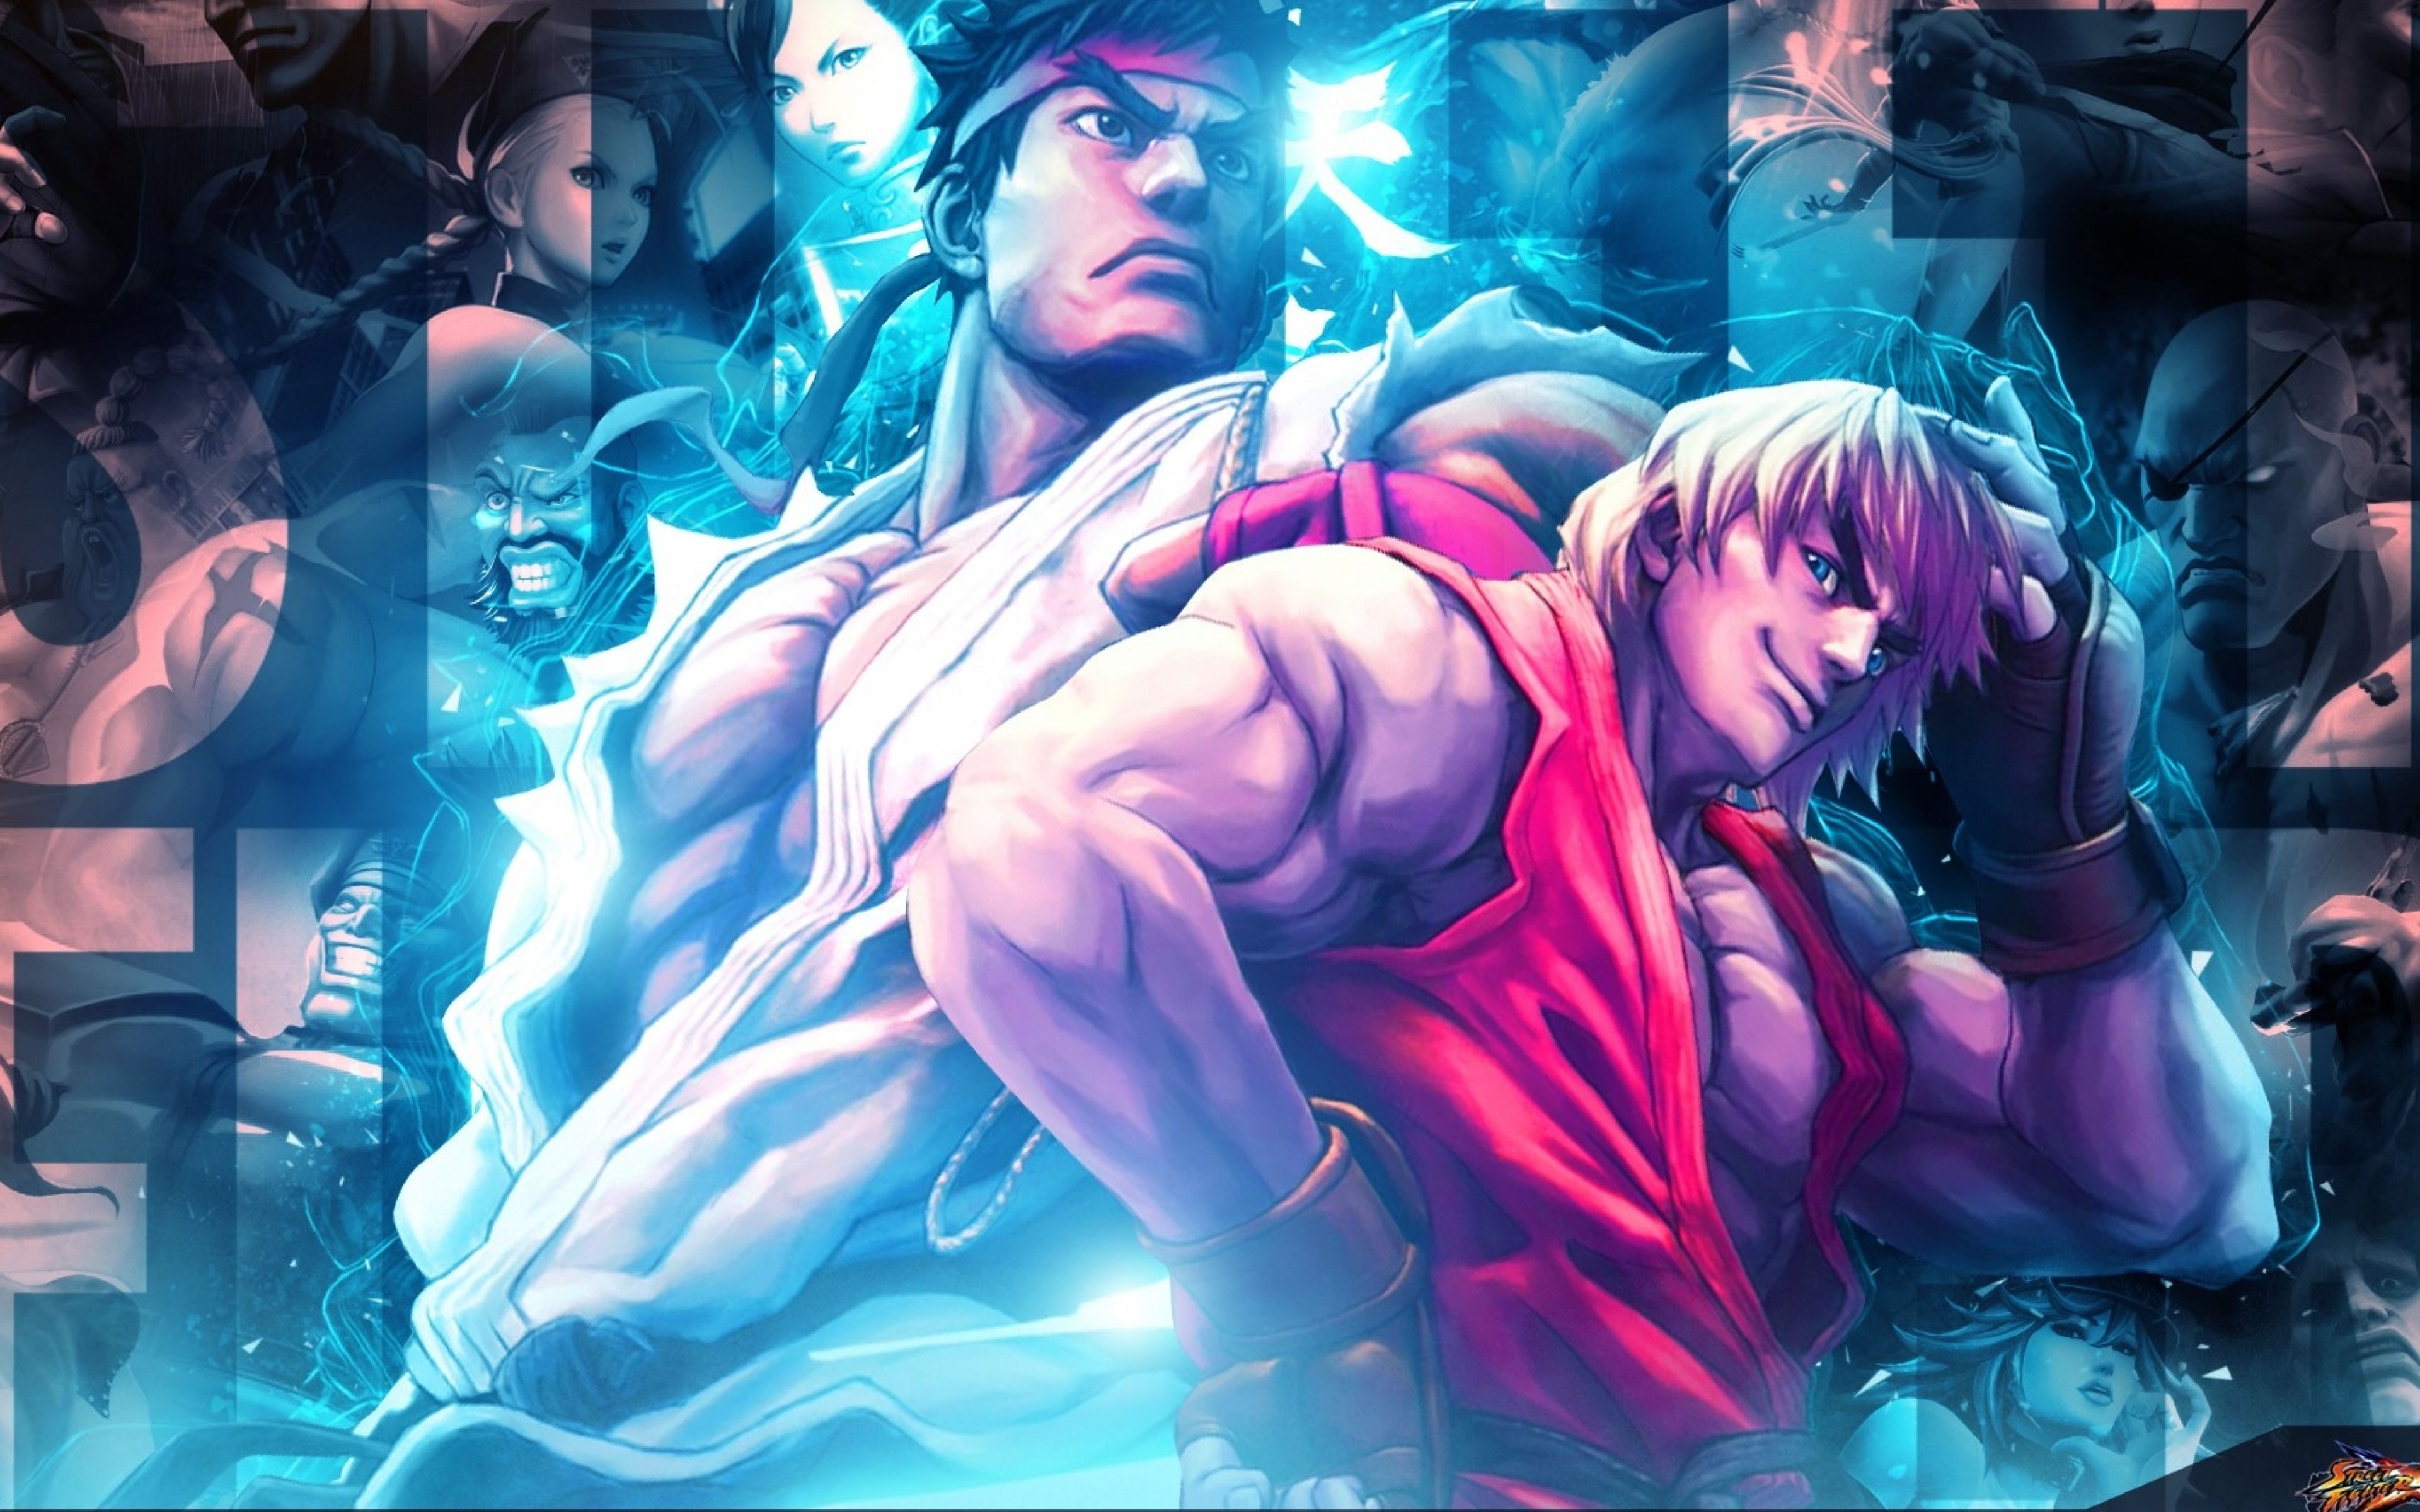 Download Ryu and Other Characters from Street Fighter X Tekken